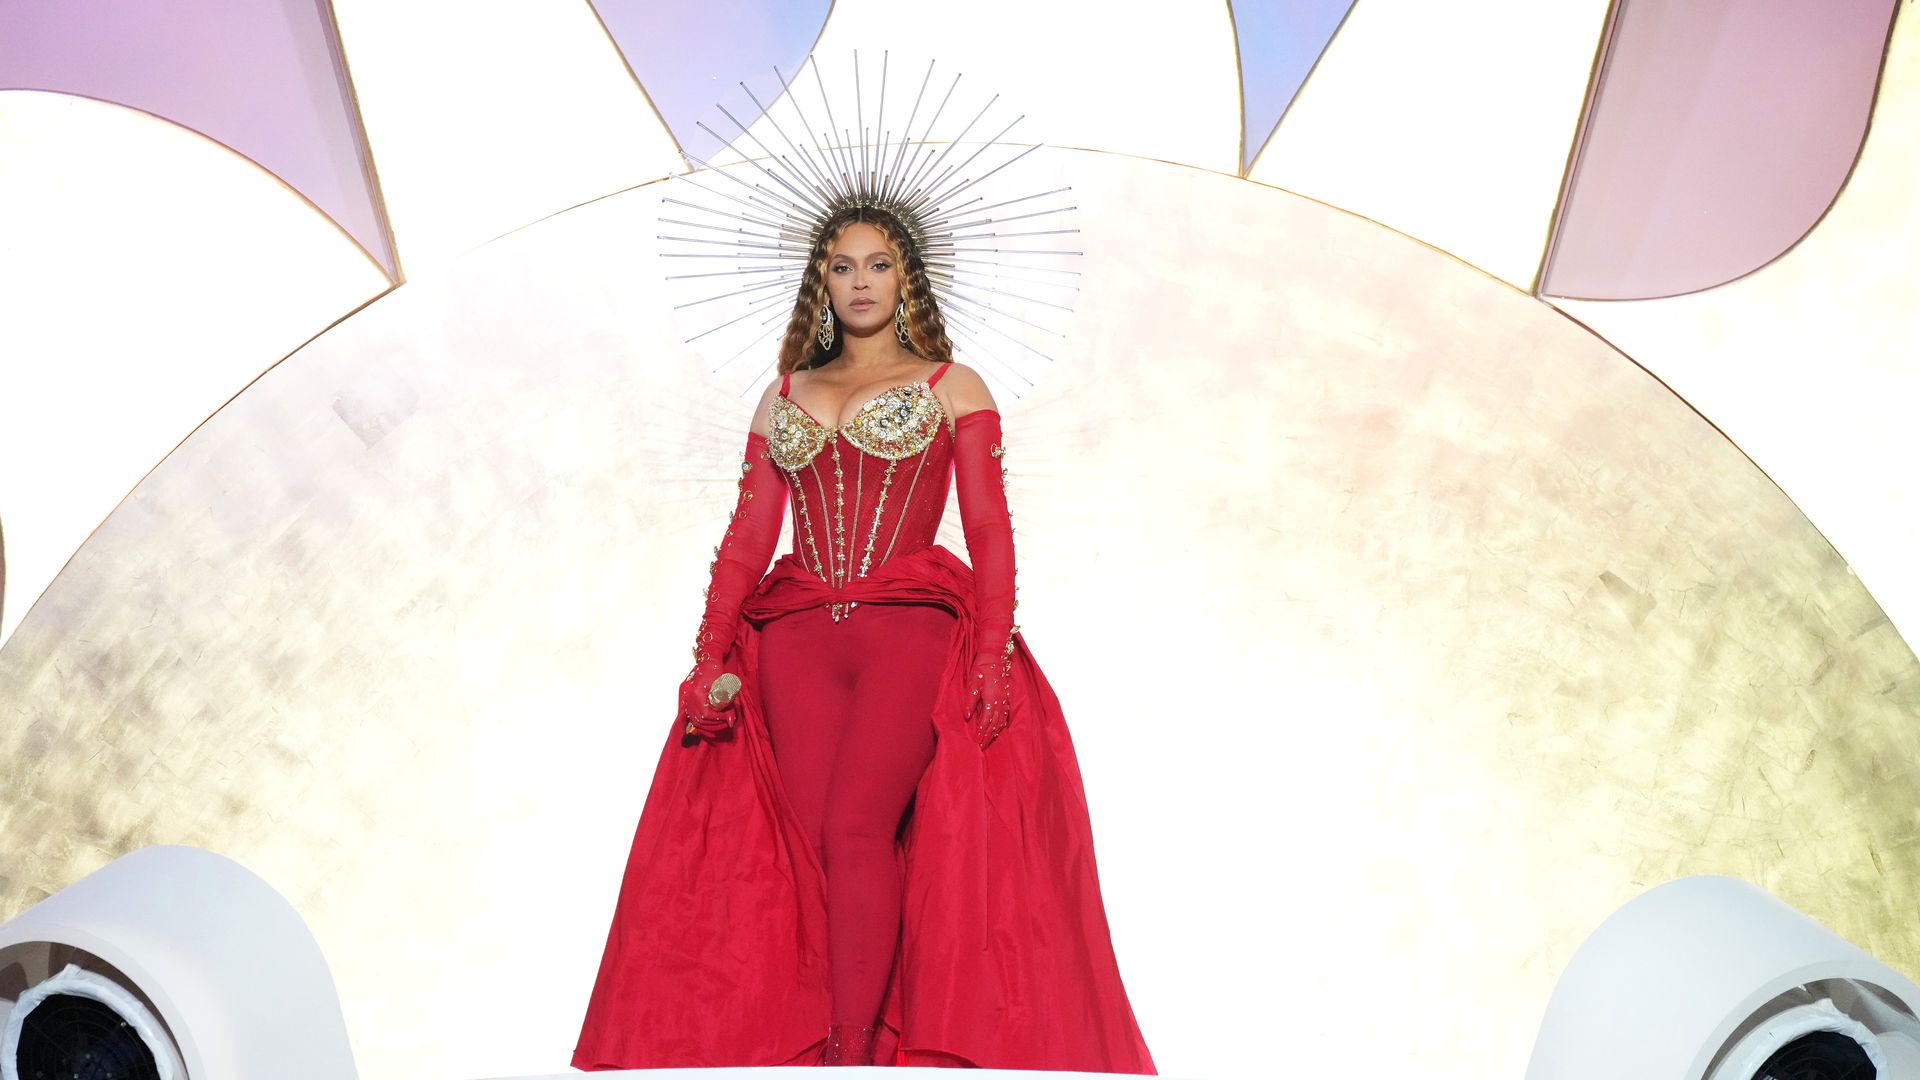 Beyoncé, wearing a red dress and large crown, stares straight ahead while performing 